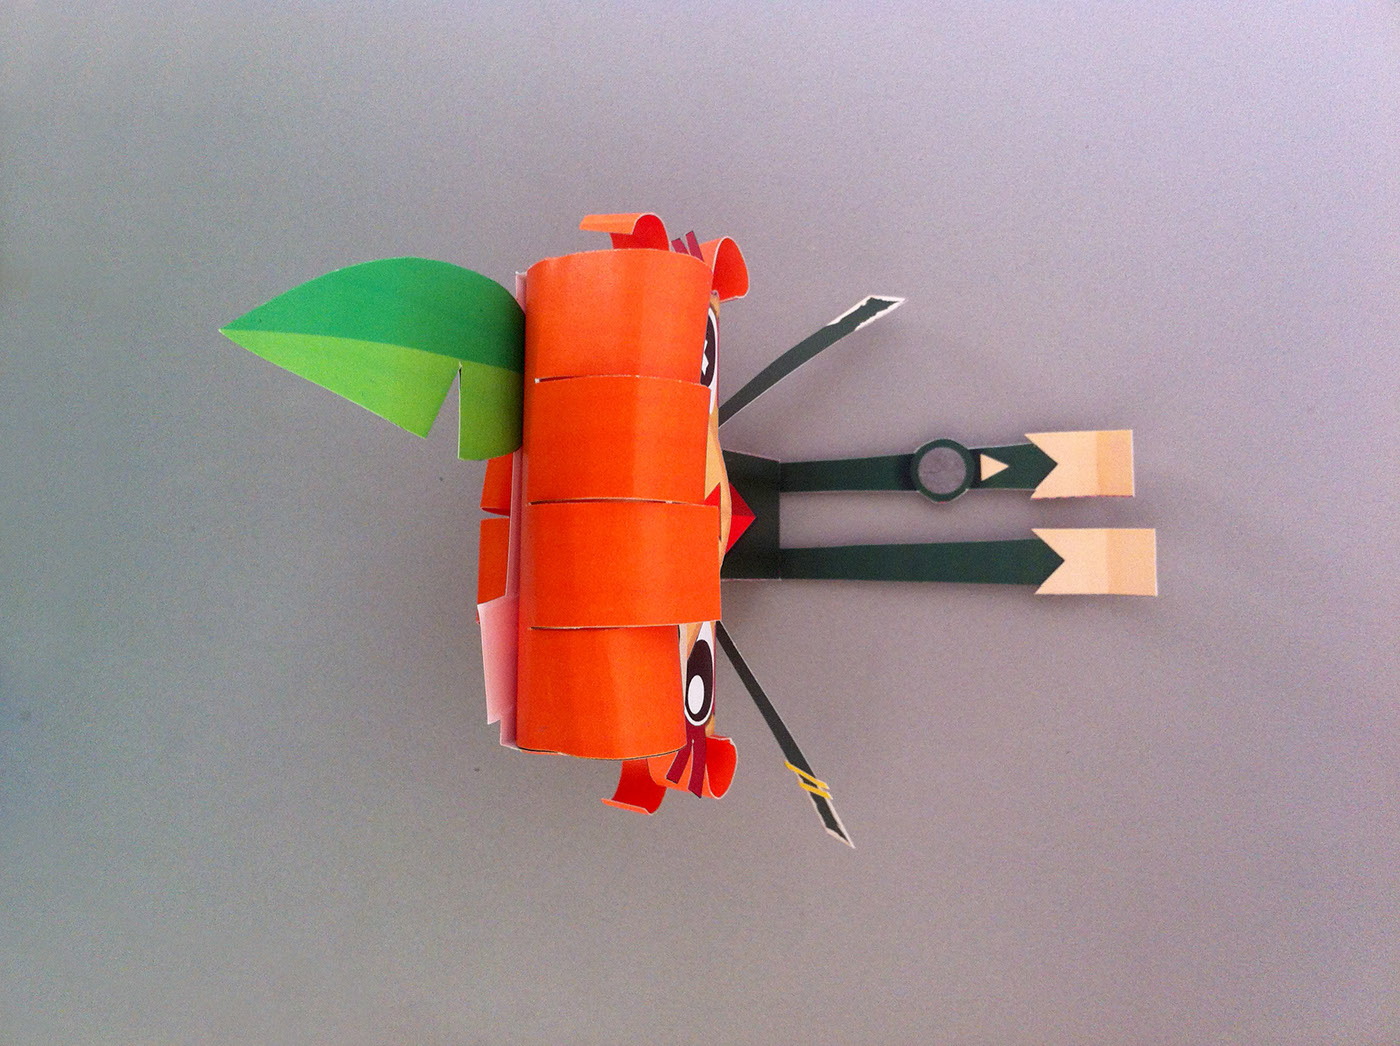 paper-craft paper-toy toy paper papercraft tearaway ikarusmedia iota Atoi